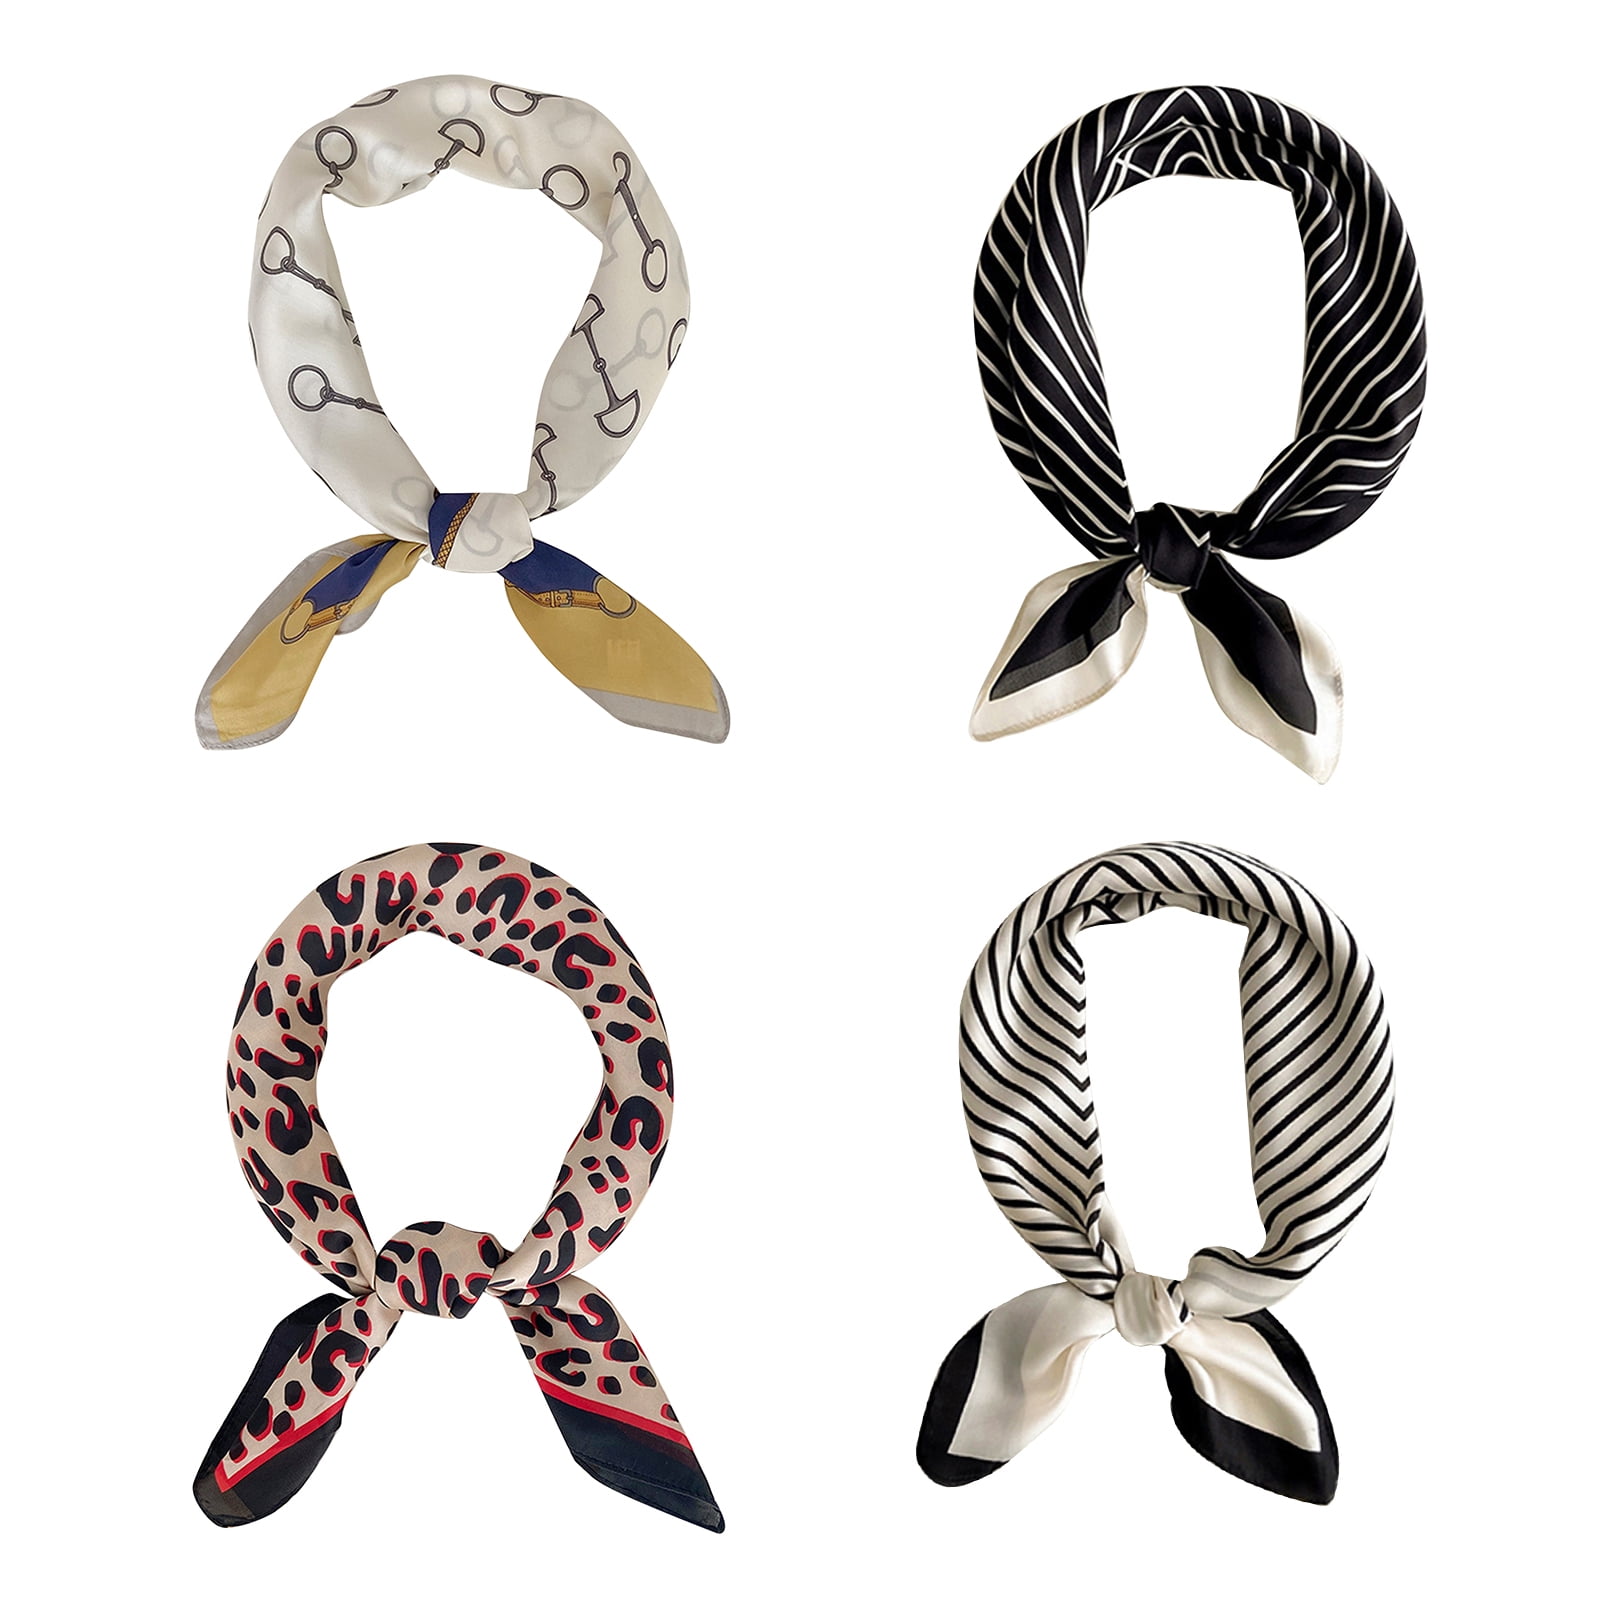 Details about   Ponytail scrunchies hair ties for Women Hair Bow Tie Scrunchies Hair Bands Print 